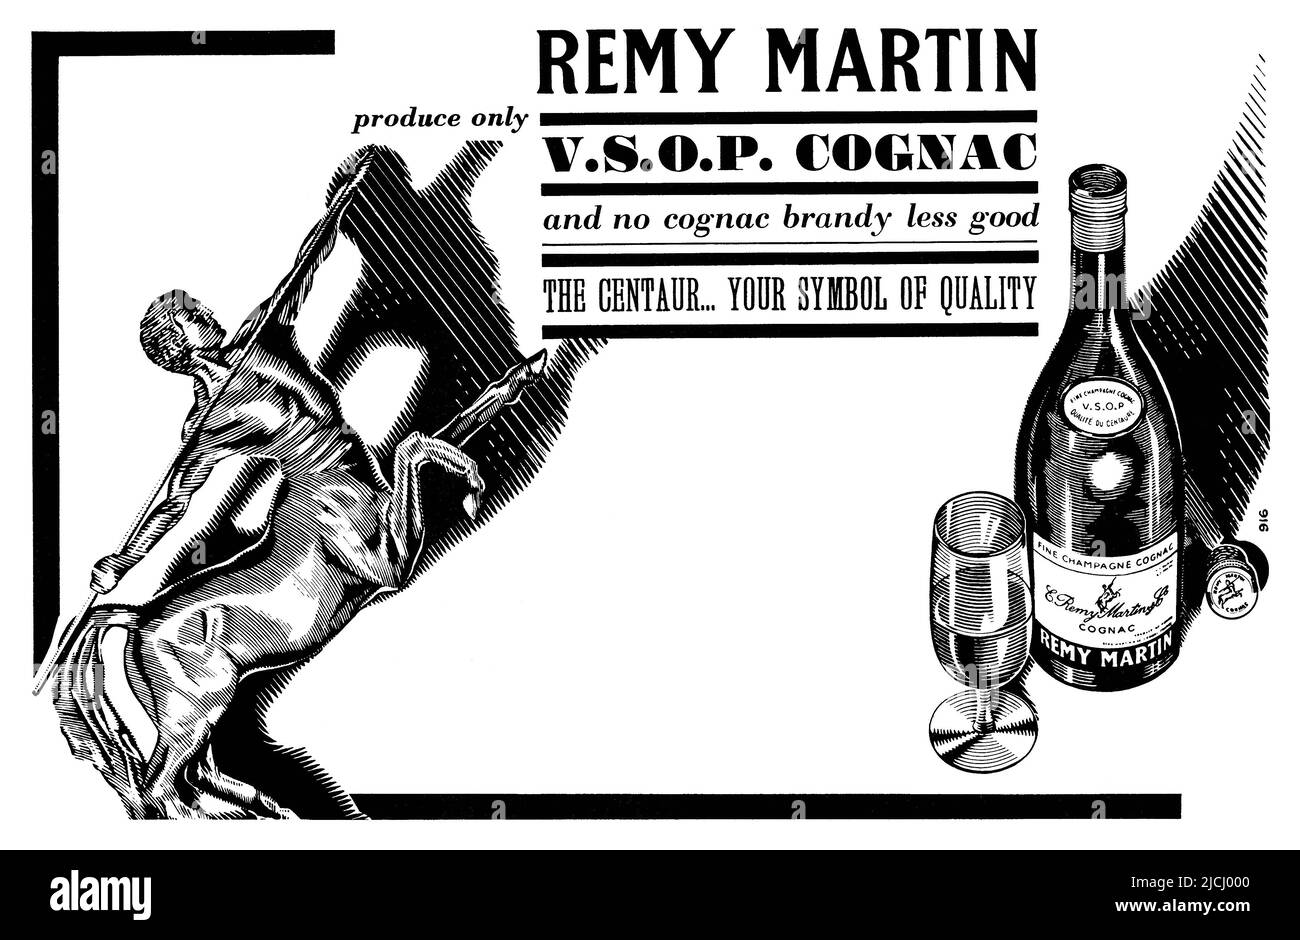 1964 British advertisement for Remy Martin V.S.O.P. Cognac. Stock Photo